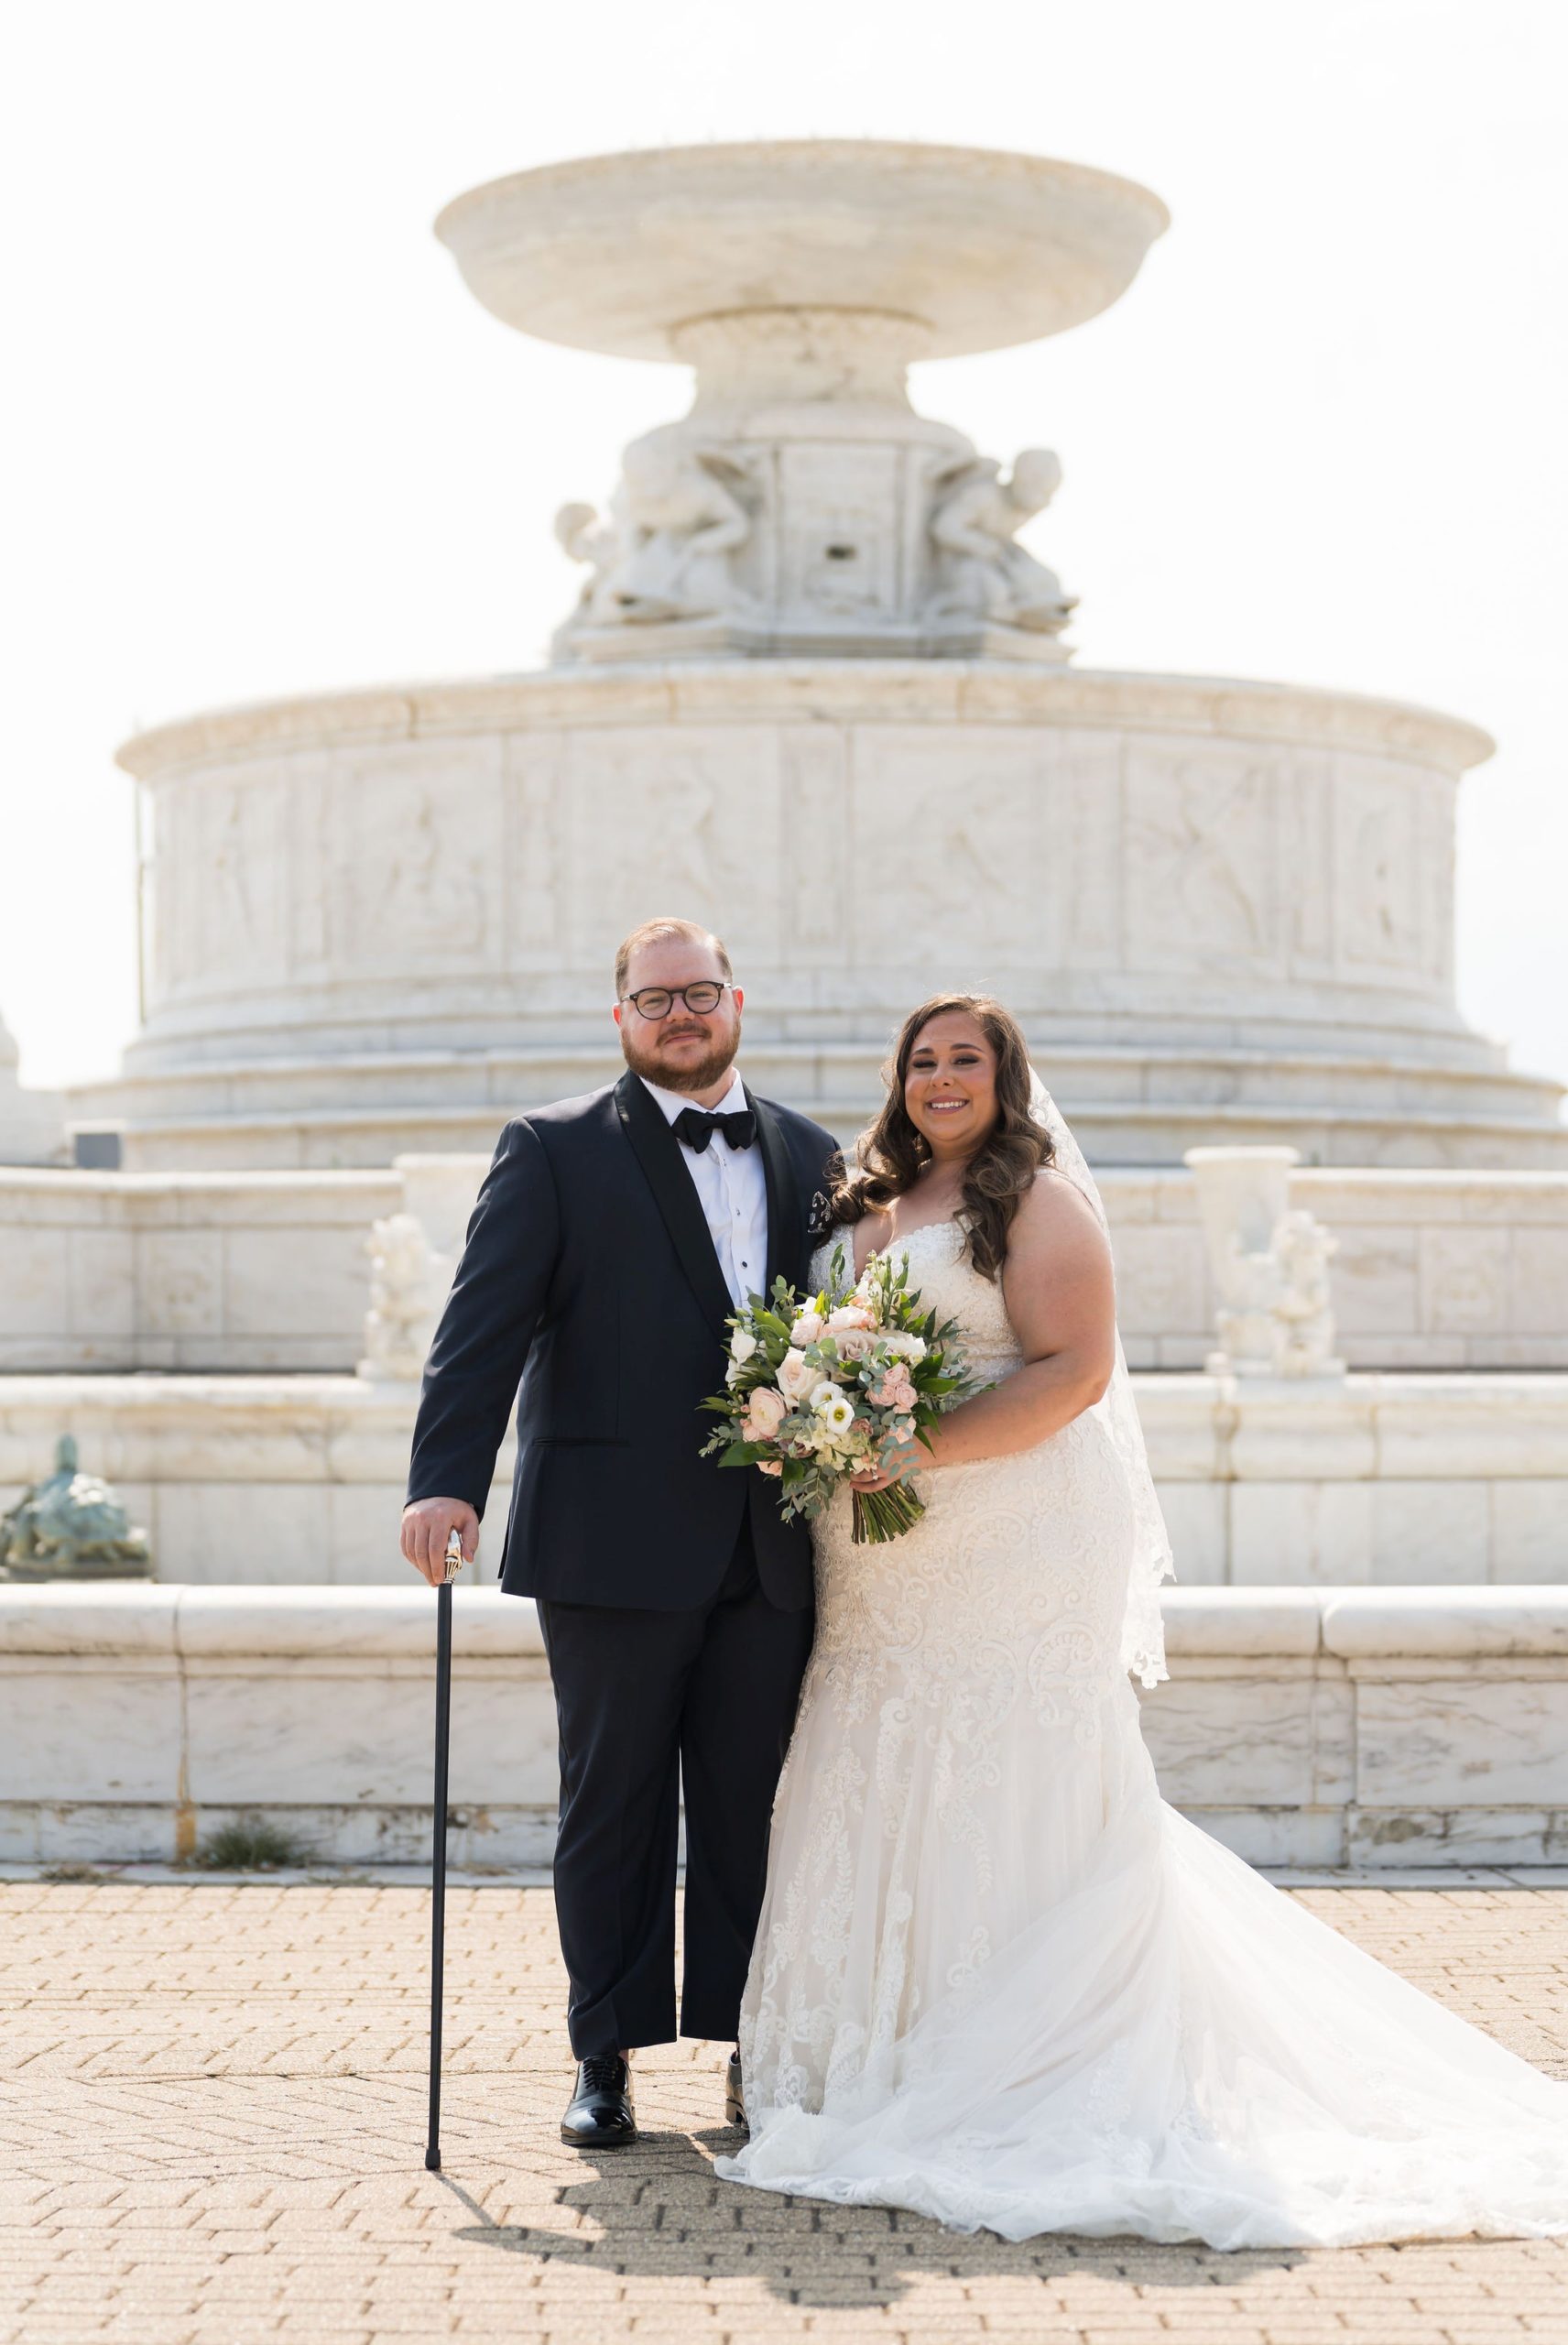 A wedding portrait in front of the Belle Isle Fountain, Detroit. 